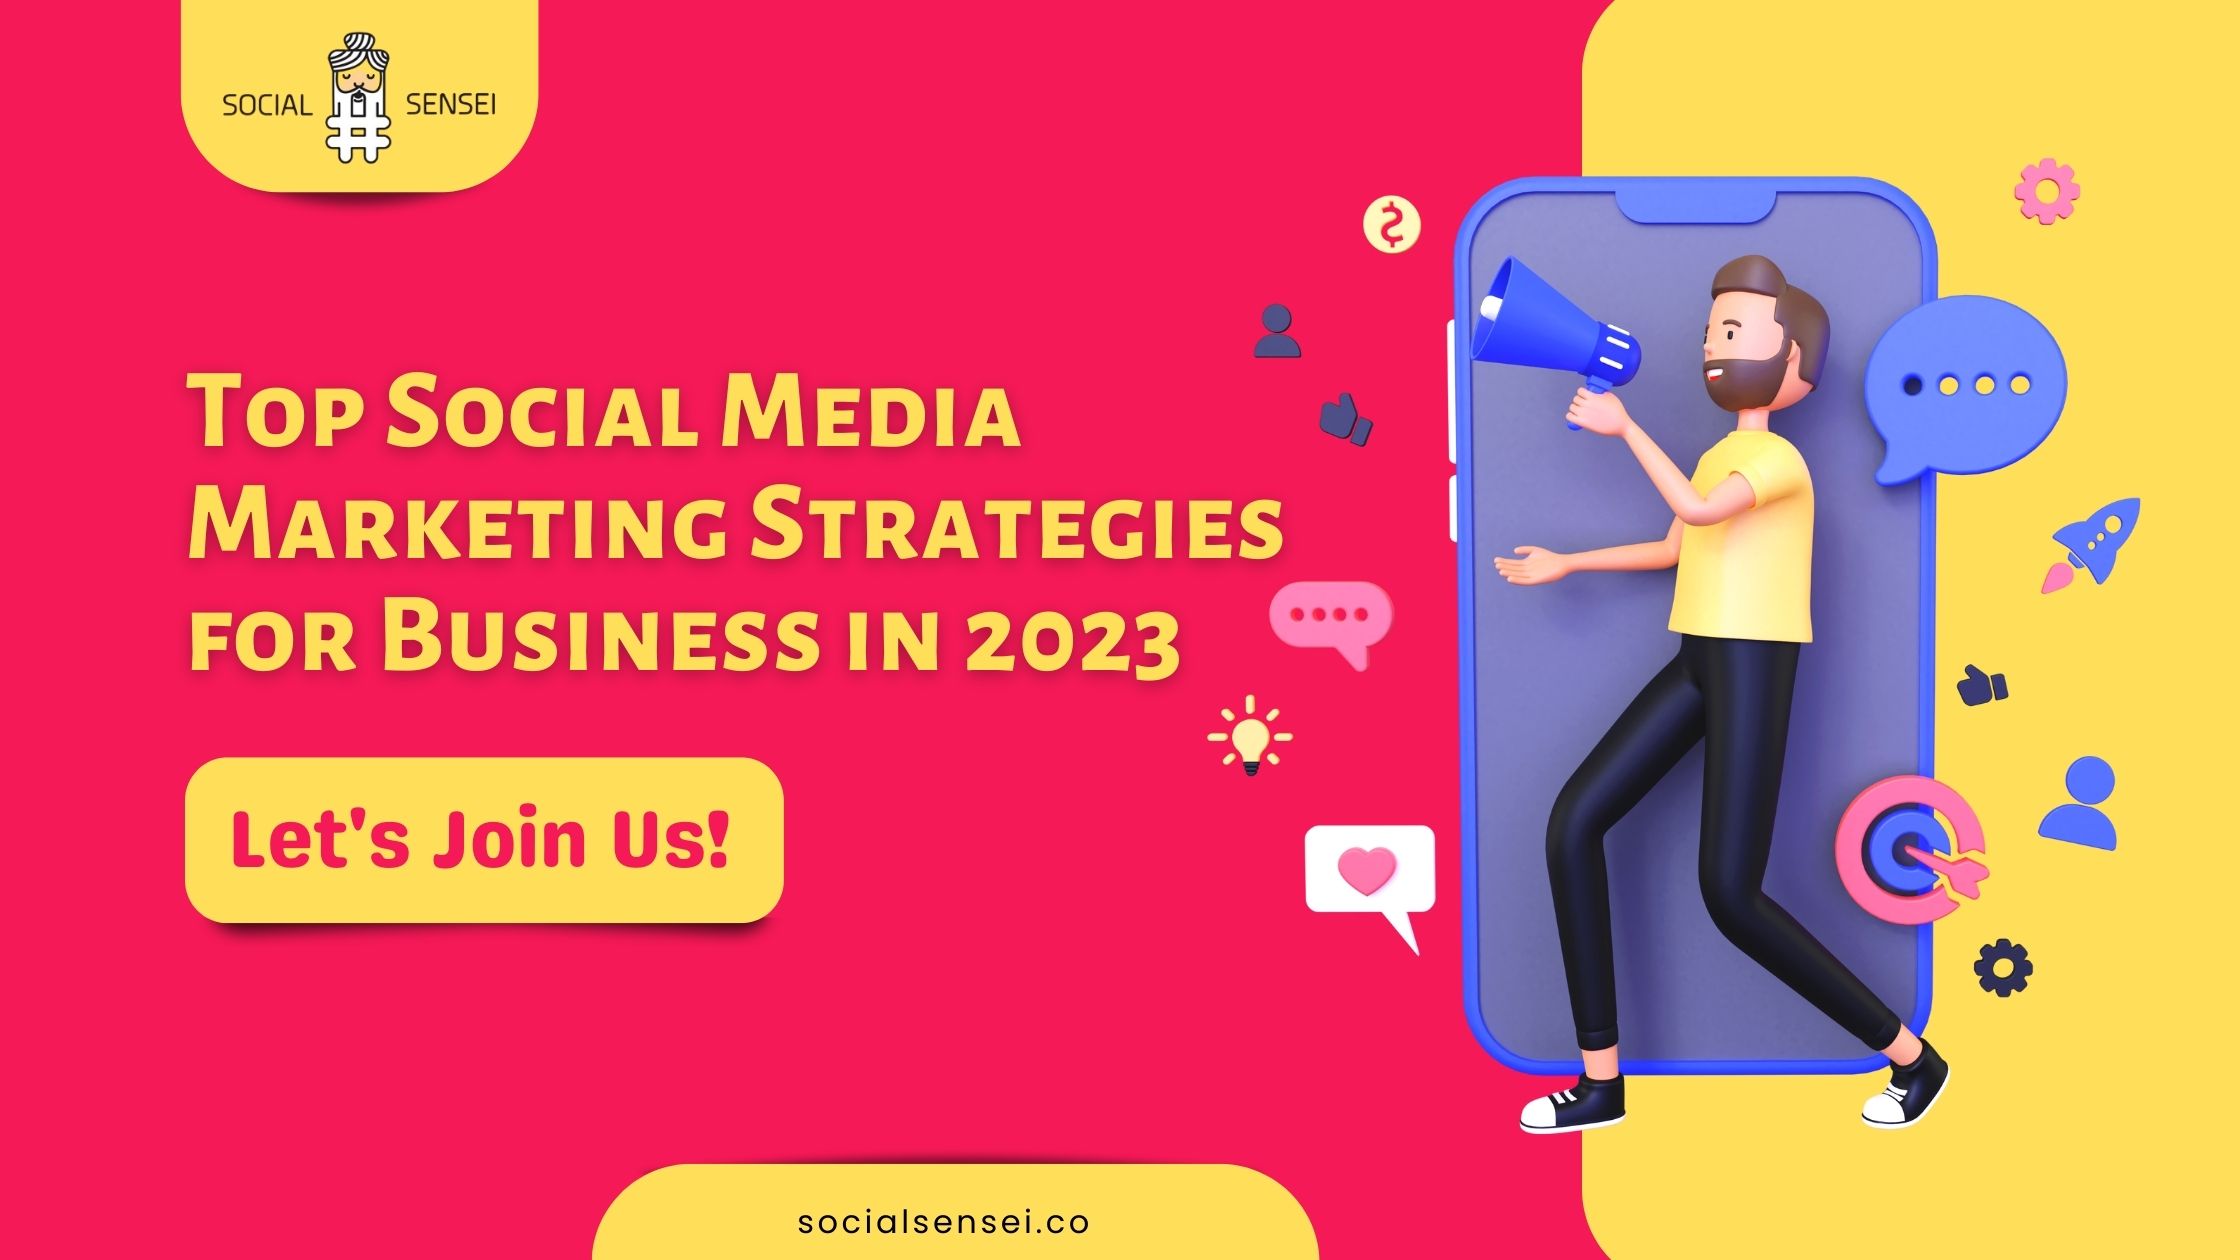 Top Social Media Marketing Strategies for Business in 2023-7f0bfed2